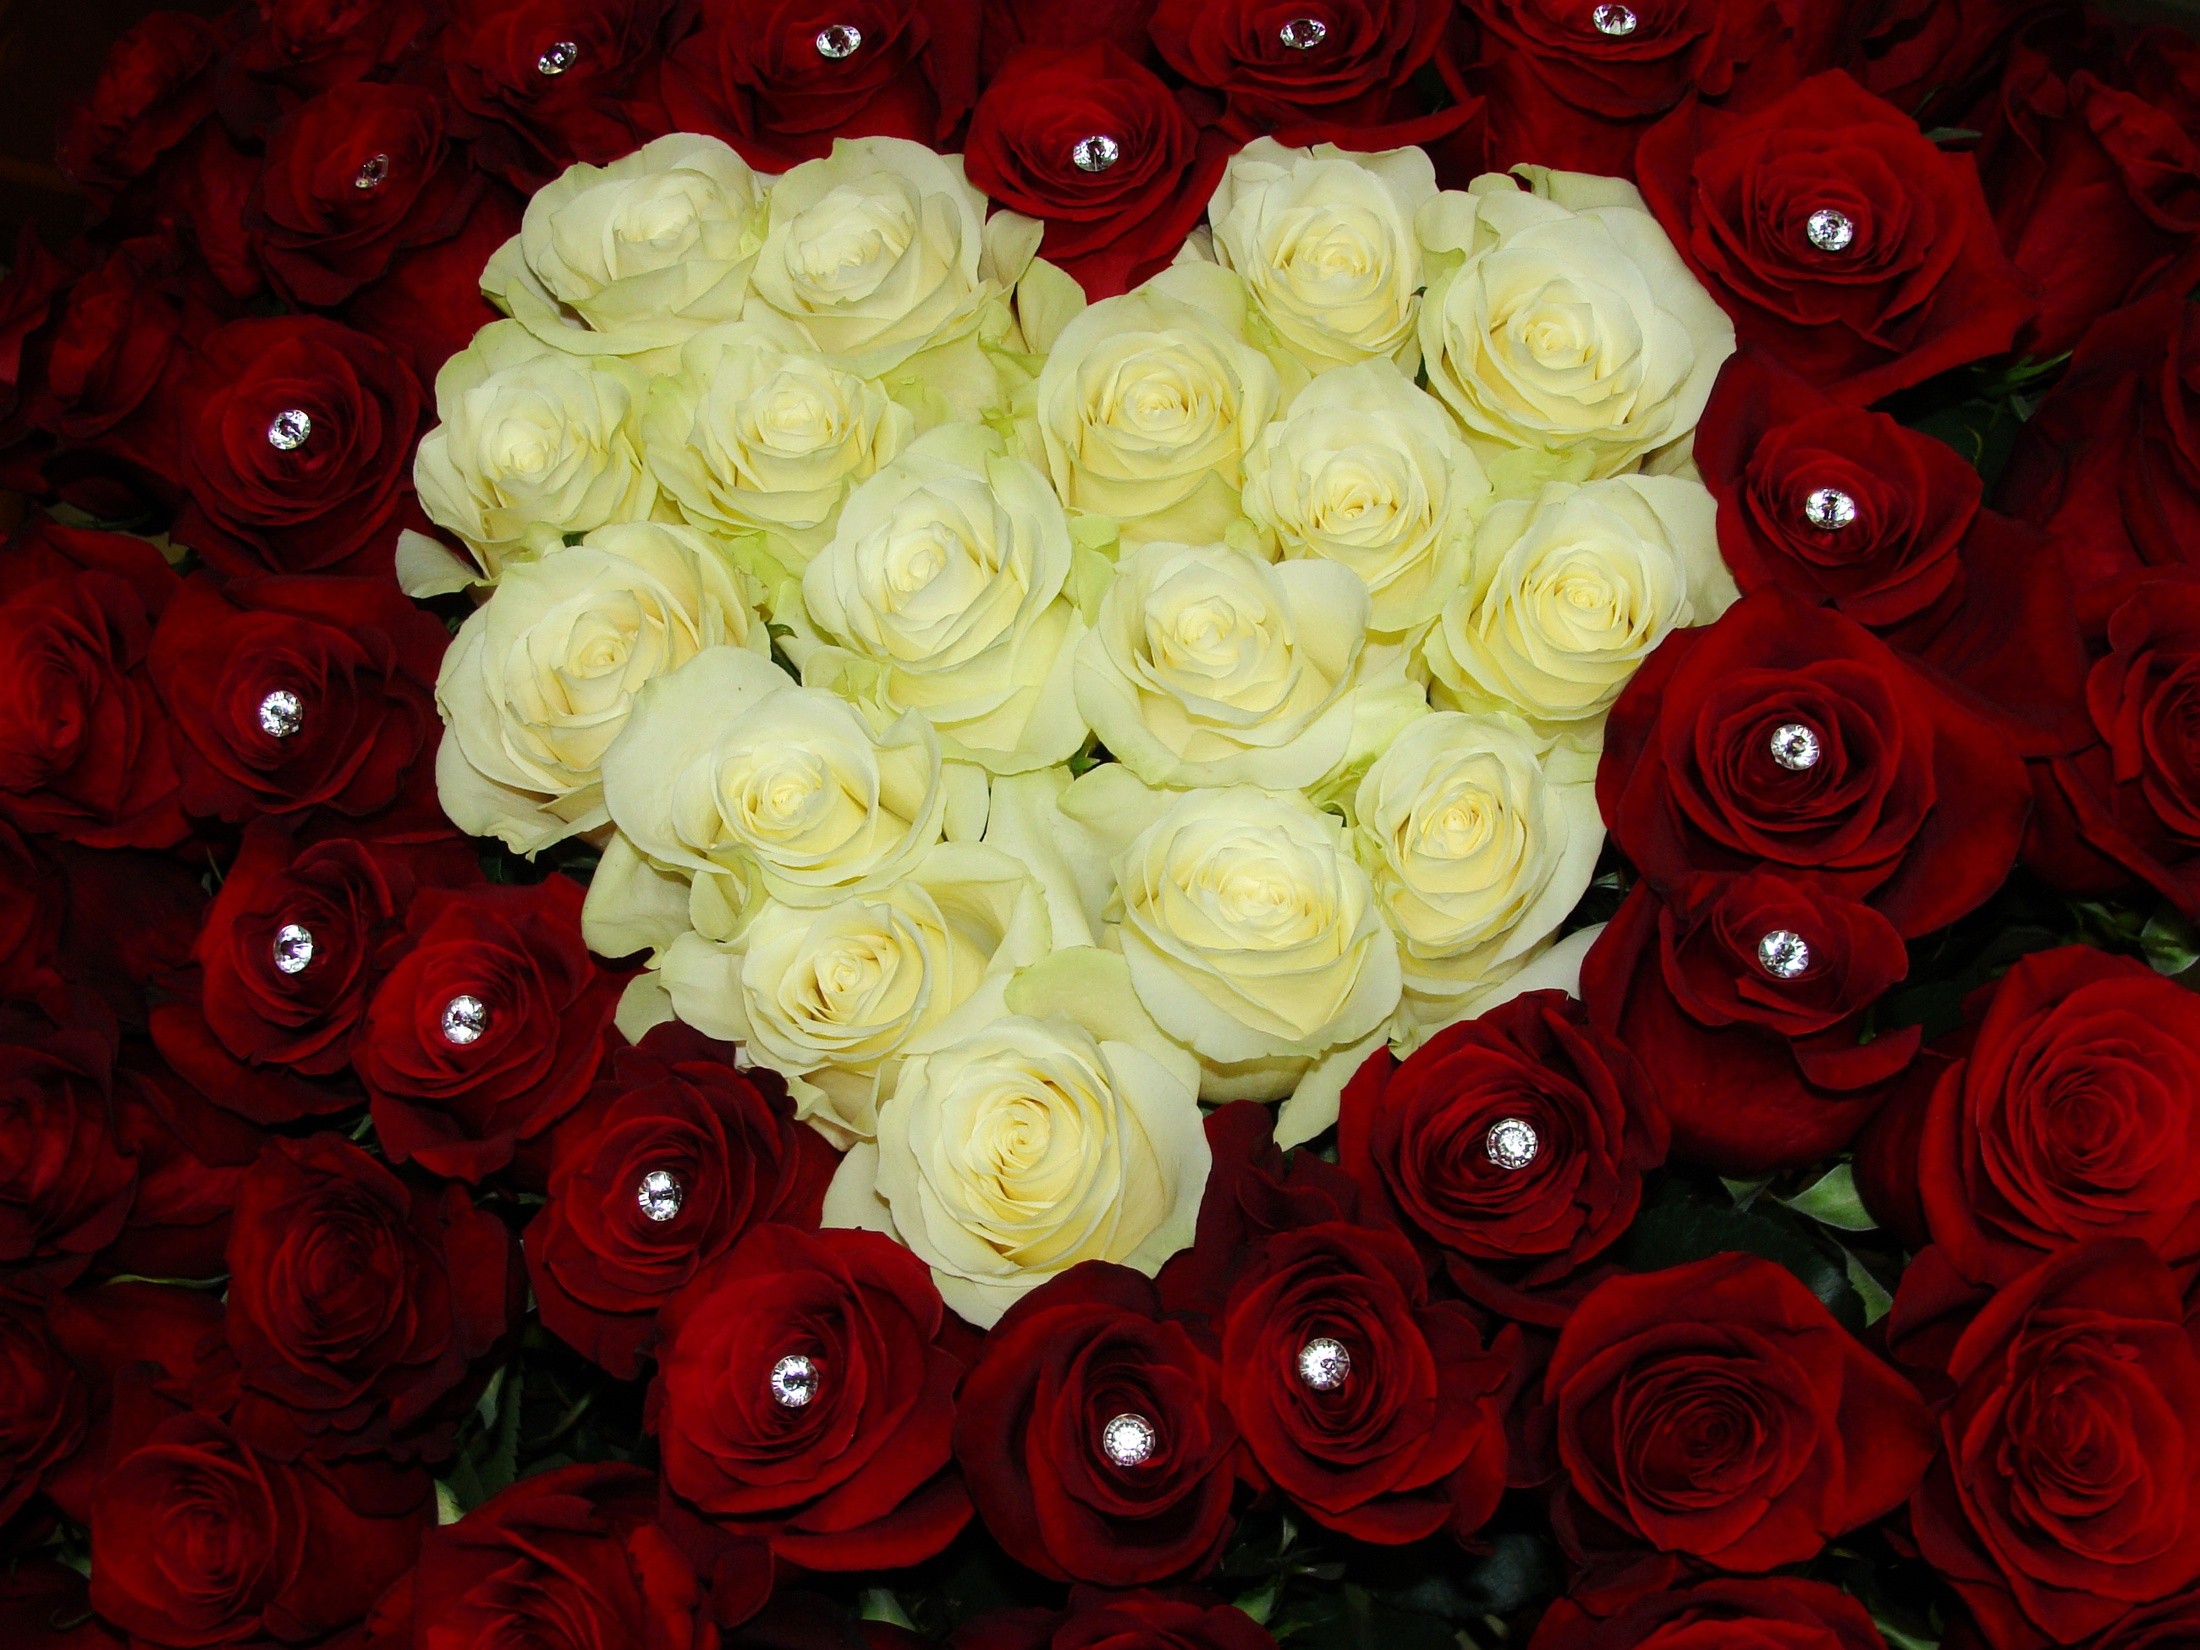 General 2200x1650 rose flowers plants red flowers yellow flowers heart (design)